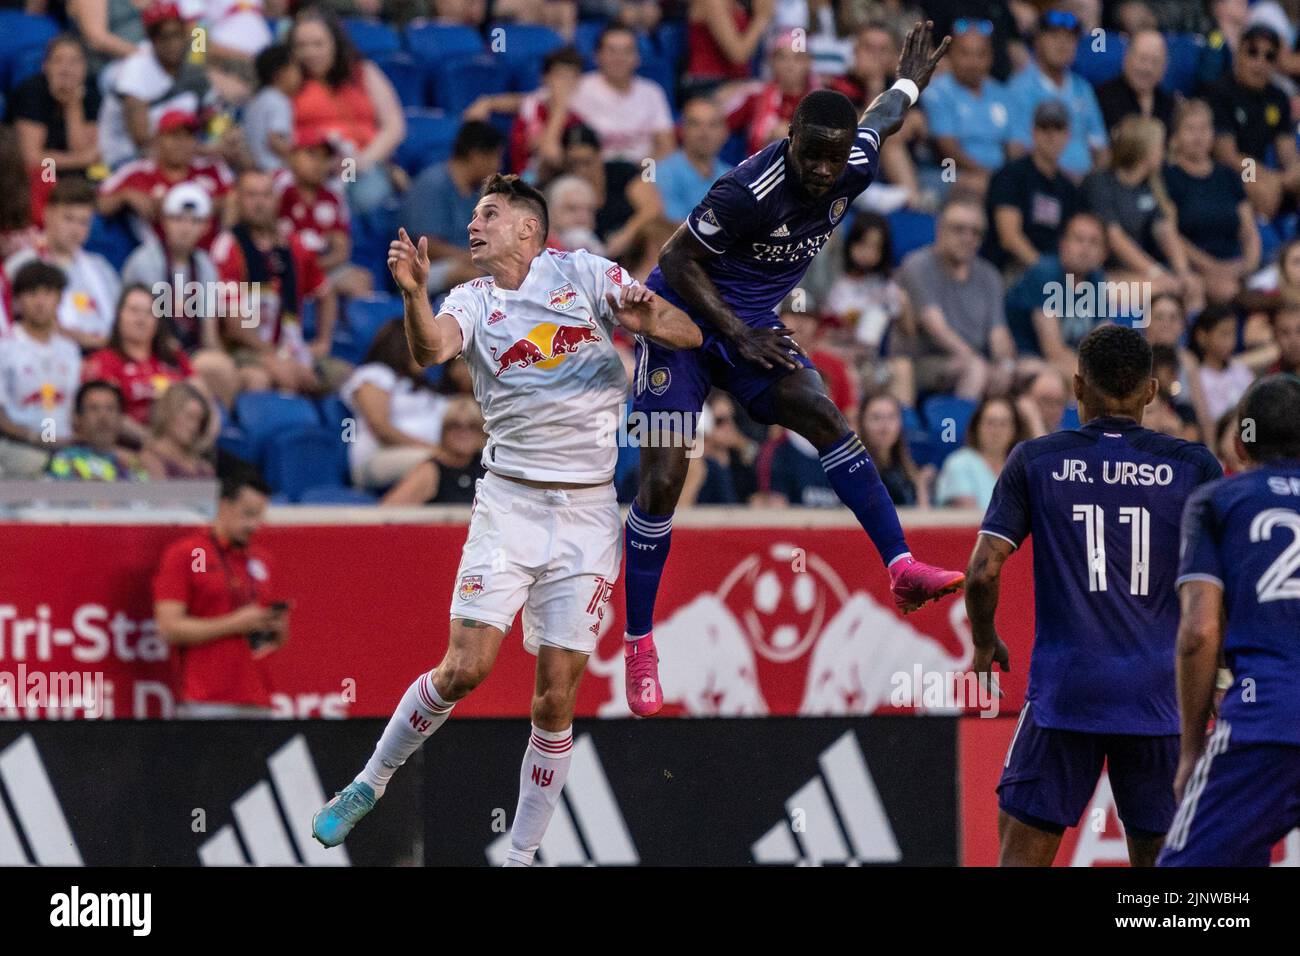 Harrison, NJ - August 13, 2022: Sean Nealis (15) of Red Bulls and Benji Michel (19) of Orlando fight for ball during MLS regular season game at Red Bull Arena Stock Photo